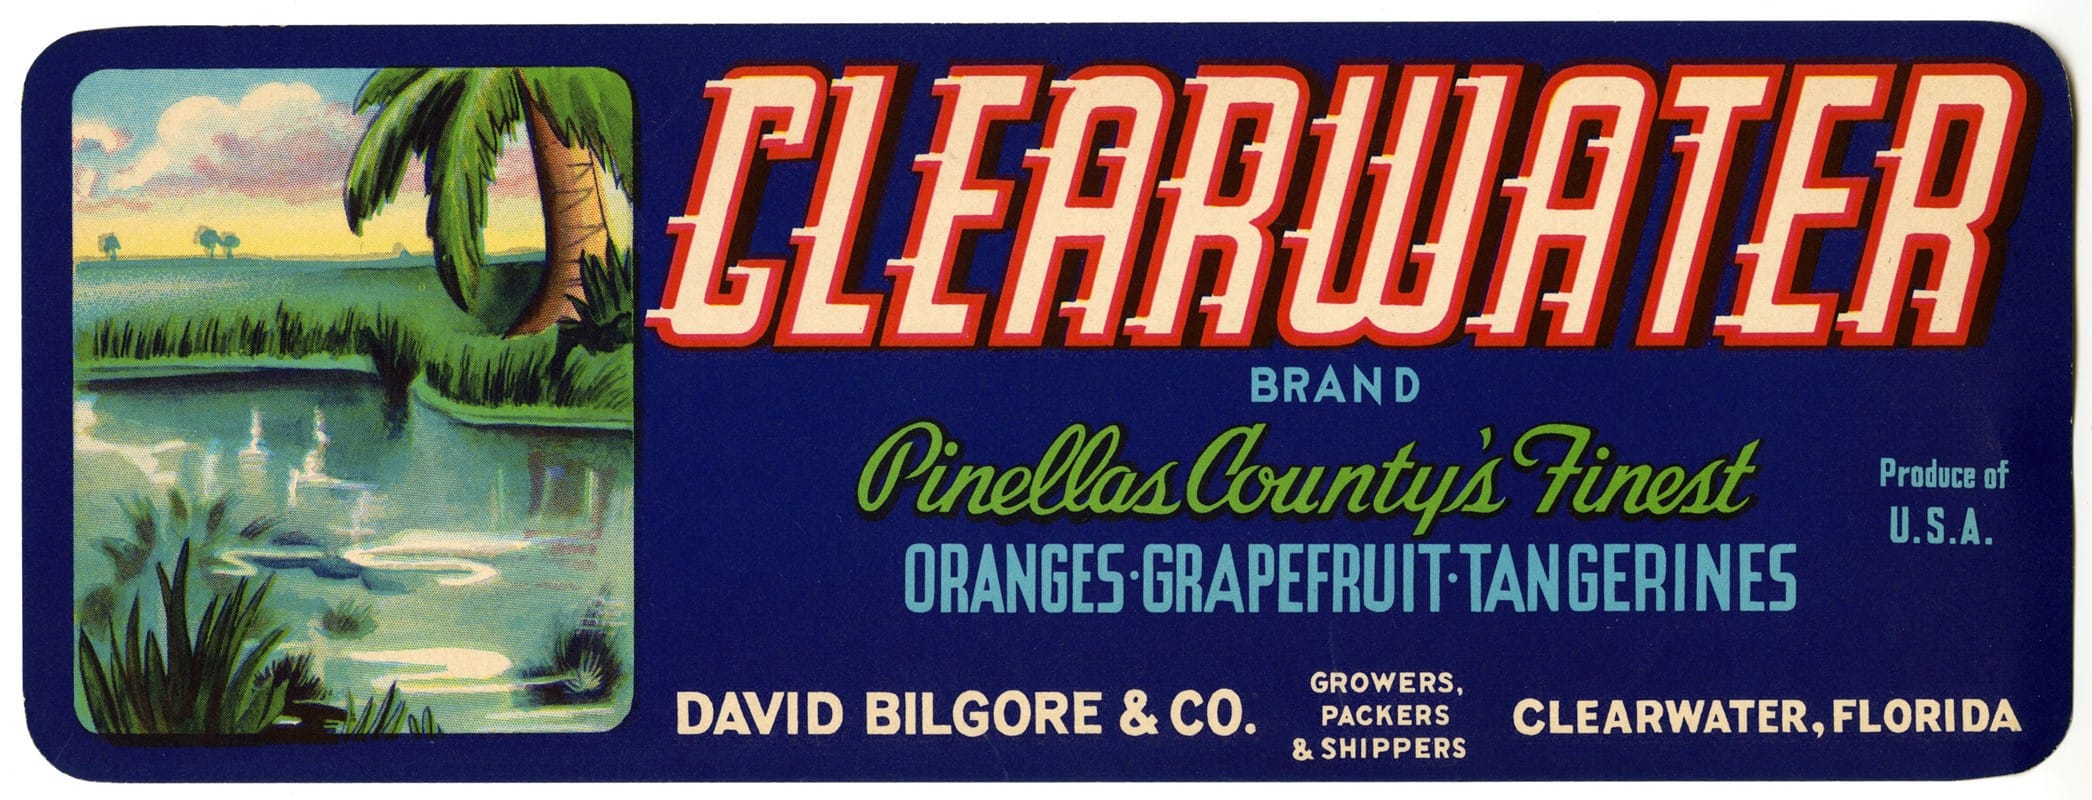 Anonymous - Clearwater Brand Citrus Label